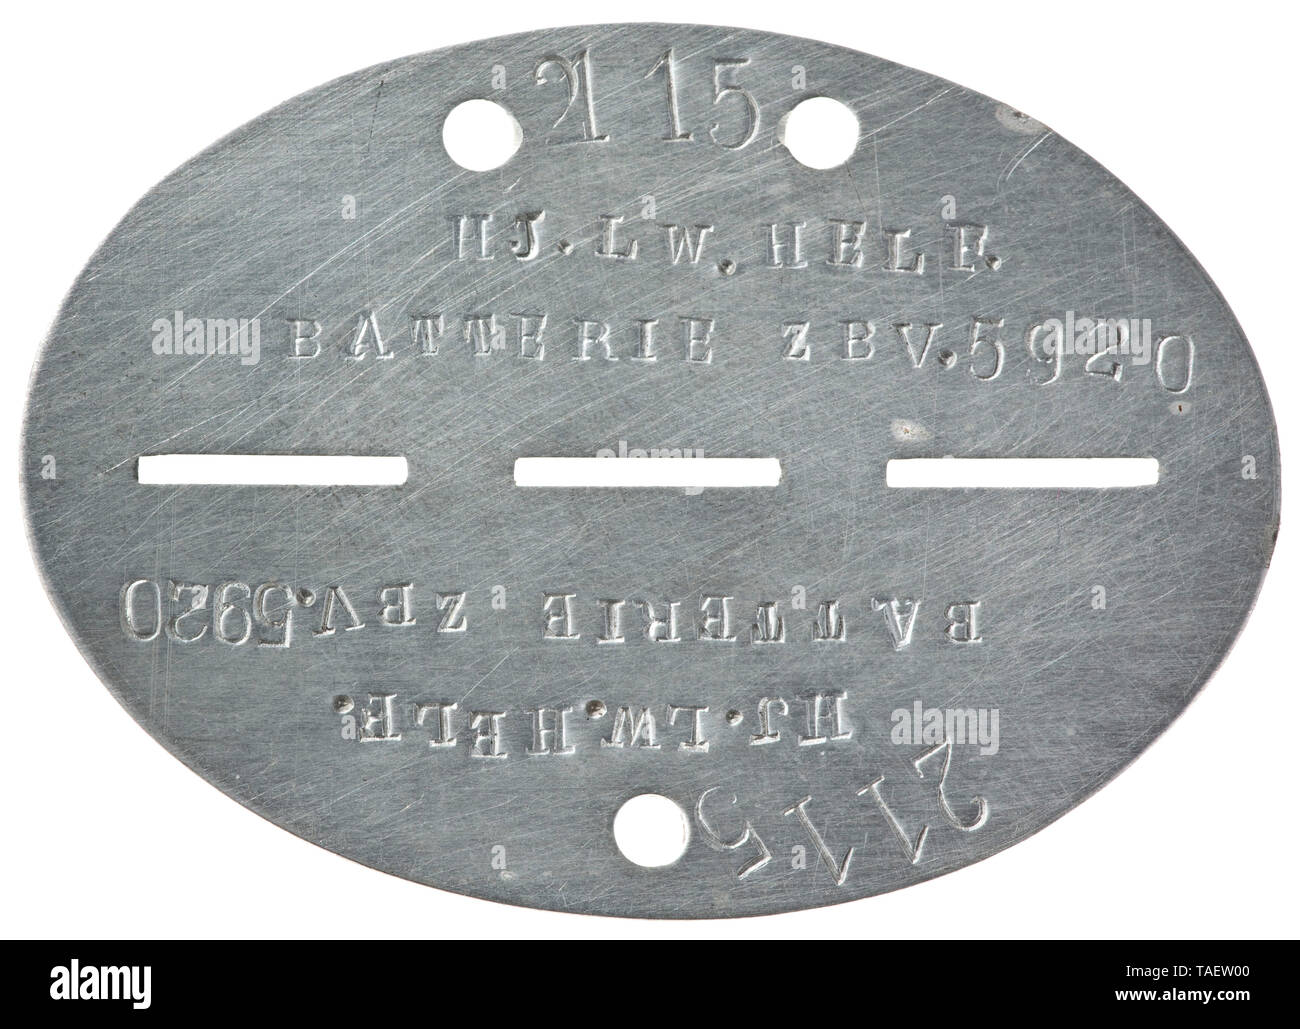 An identification tag of a Hilter Youth Luftwaffe auxiliary Aluminium mit vs. Bezeichnung '2115 - HJ.Lw. Helf. Batterie zbV. 5920', rs. ohne Markung. historic, historical, Air Force, branch of service, branches of service, armed service, armed services, military, militaria, air forces, object, objects, stills, clipping, clippings, cut out, cut-out, cut-outs, 20th century, Editorial-Use-Only Stock Photo